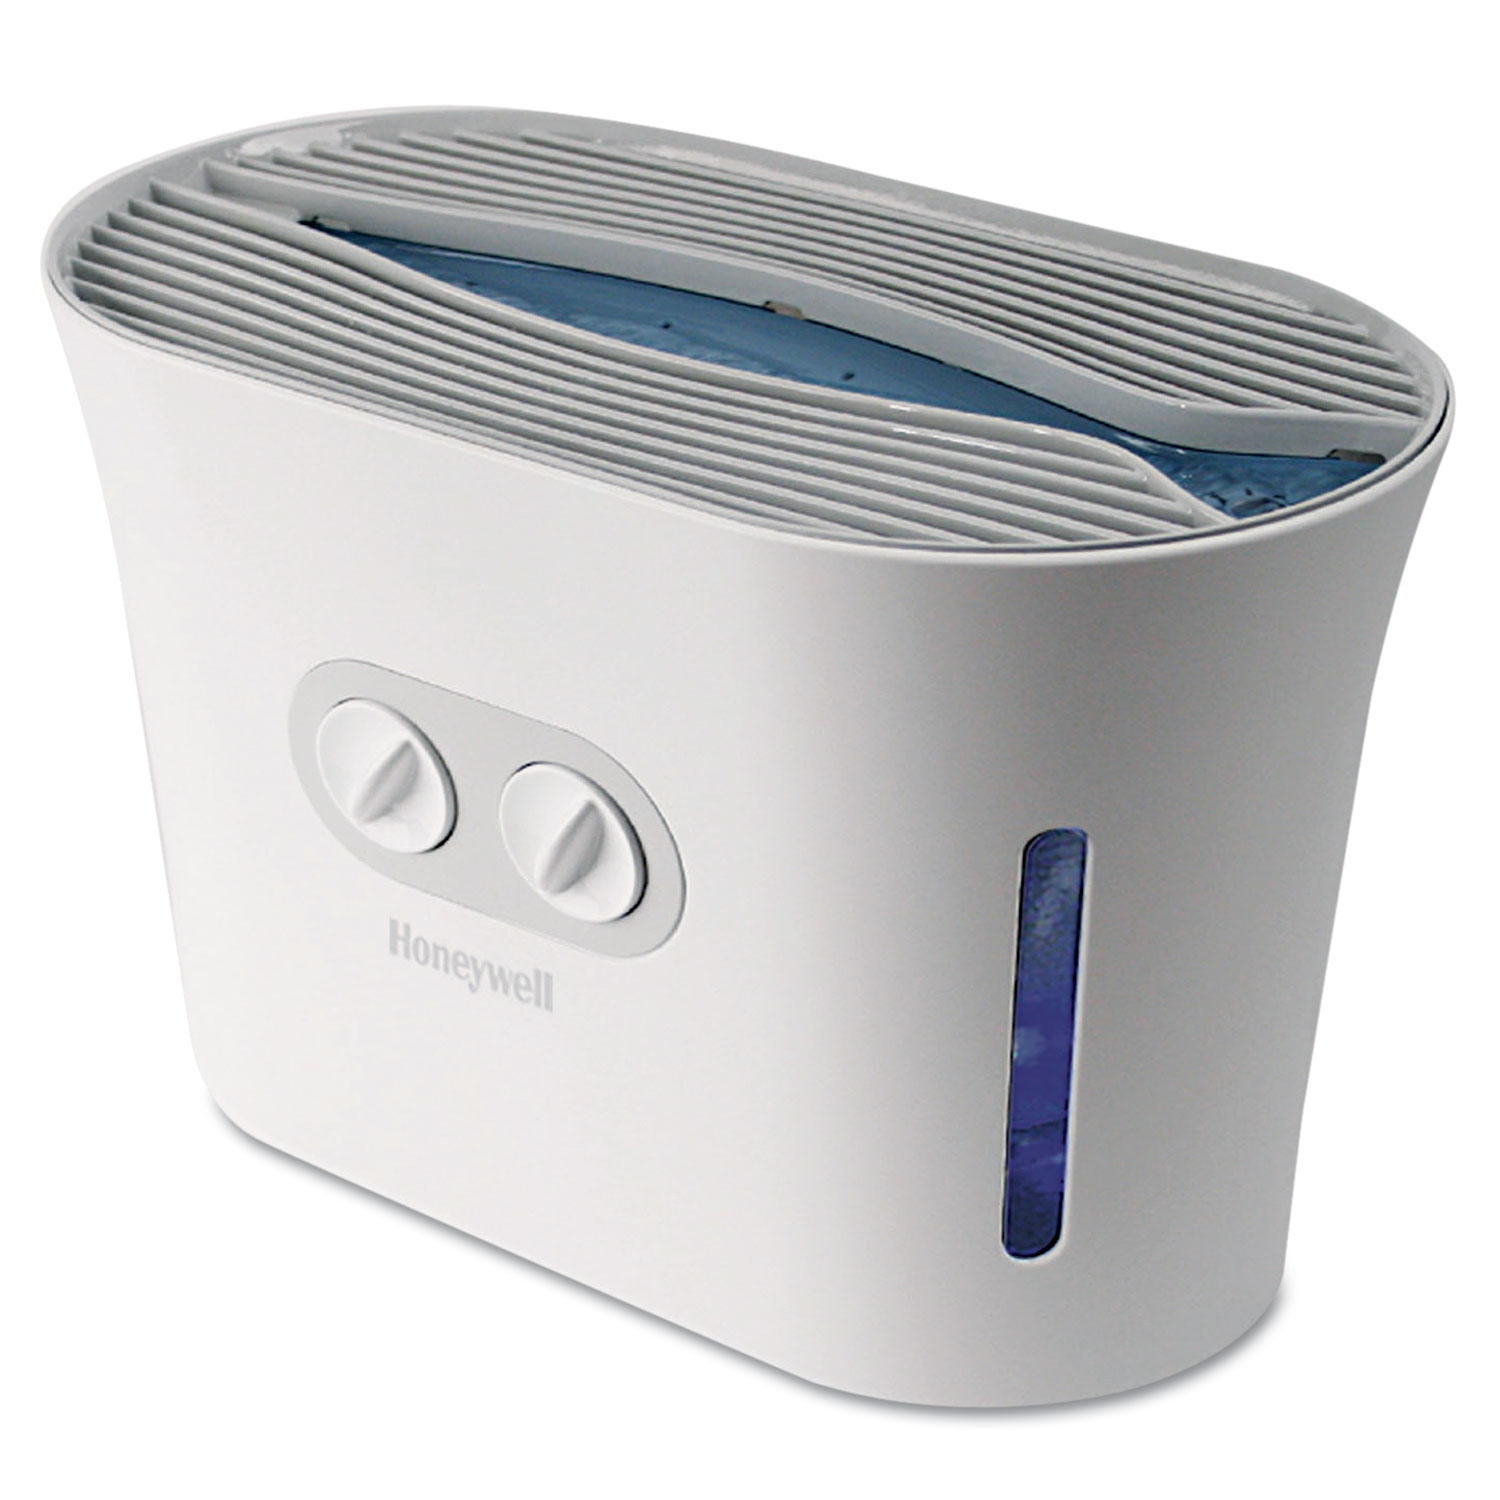  Honeywell HCM-750 Easy-Care Top Fill Cool Mist Humidifier, White, 16 7/10w x 9 4/5d x 12 2/5h (HWLHCM750) 